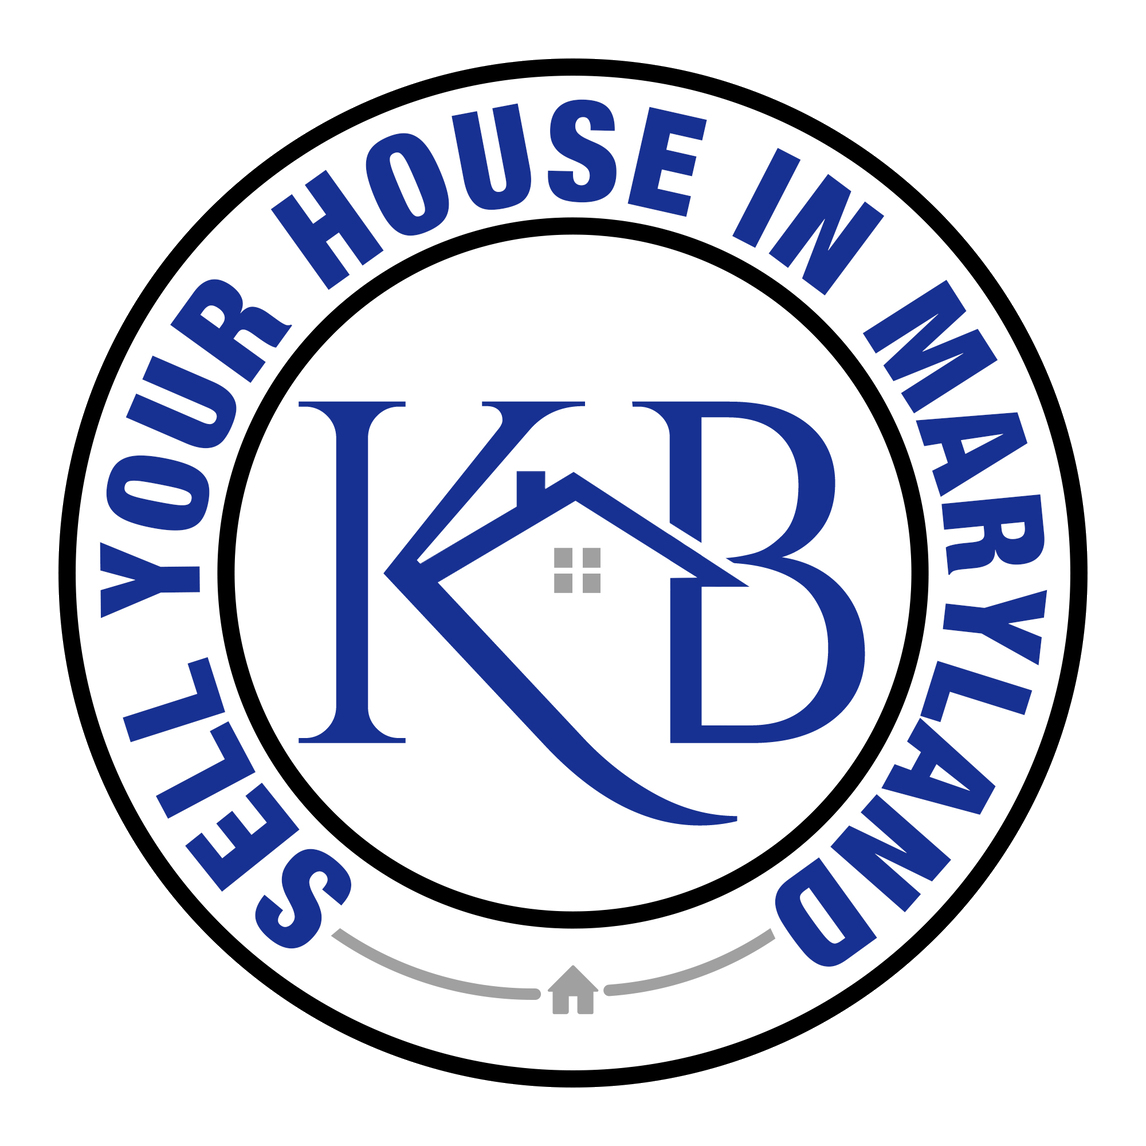 Sell Your House in Maryland logo